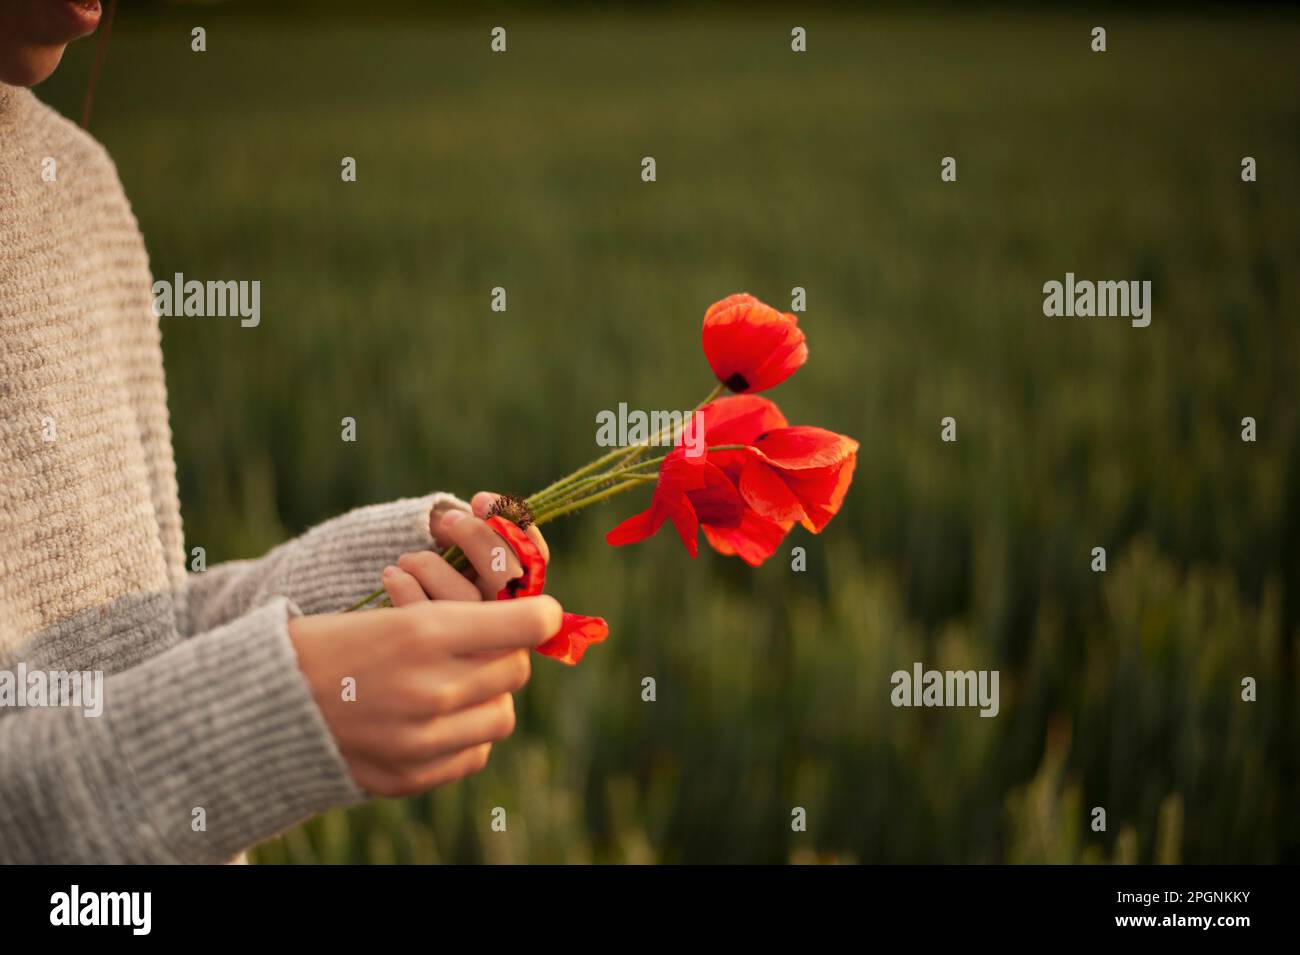 Hand of girl tearing petals from poppy flower Stock Photo